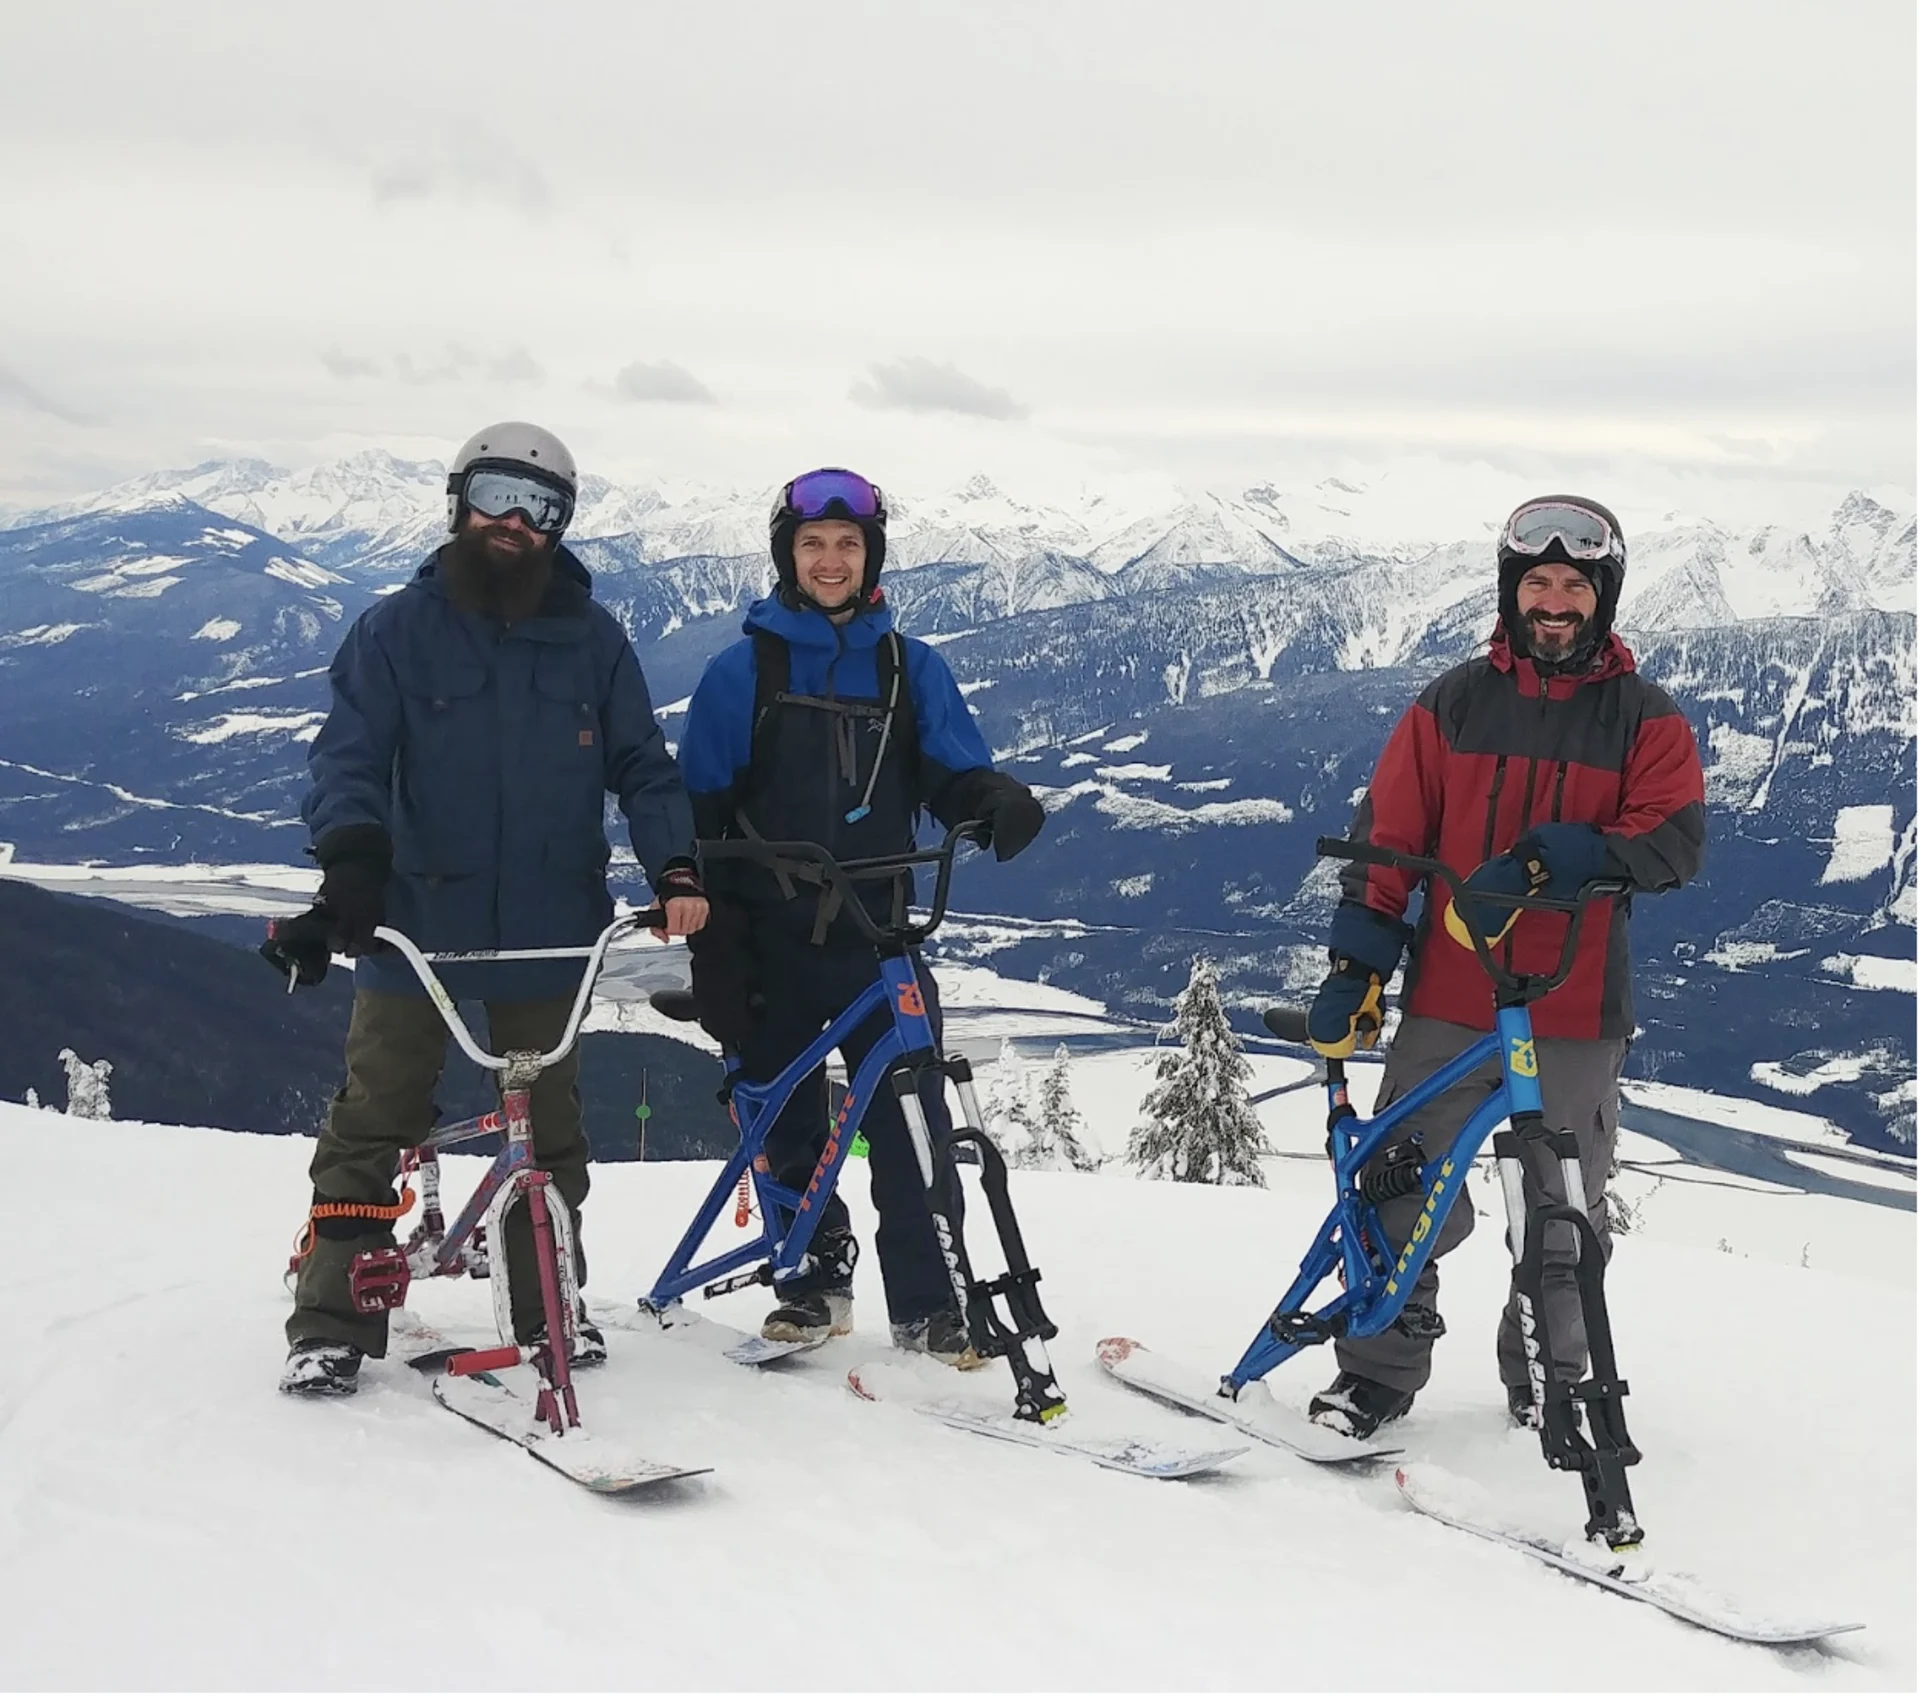 Facebook/Revelstoke Skibikes: Cyganik stands at the top of Revelstoke mountain with a pair of newly minted ski bikers.